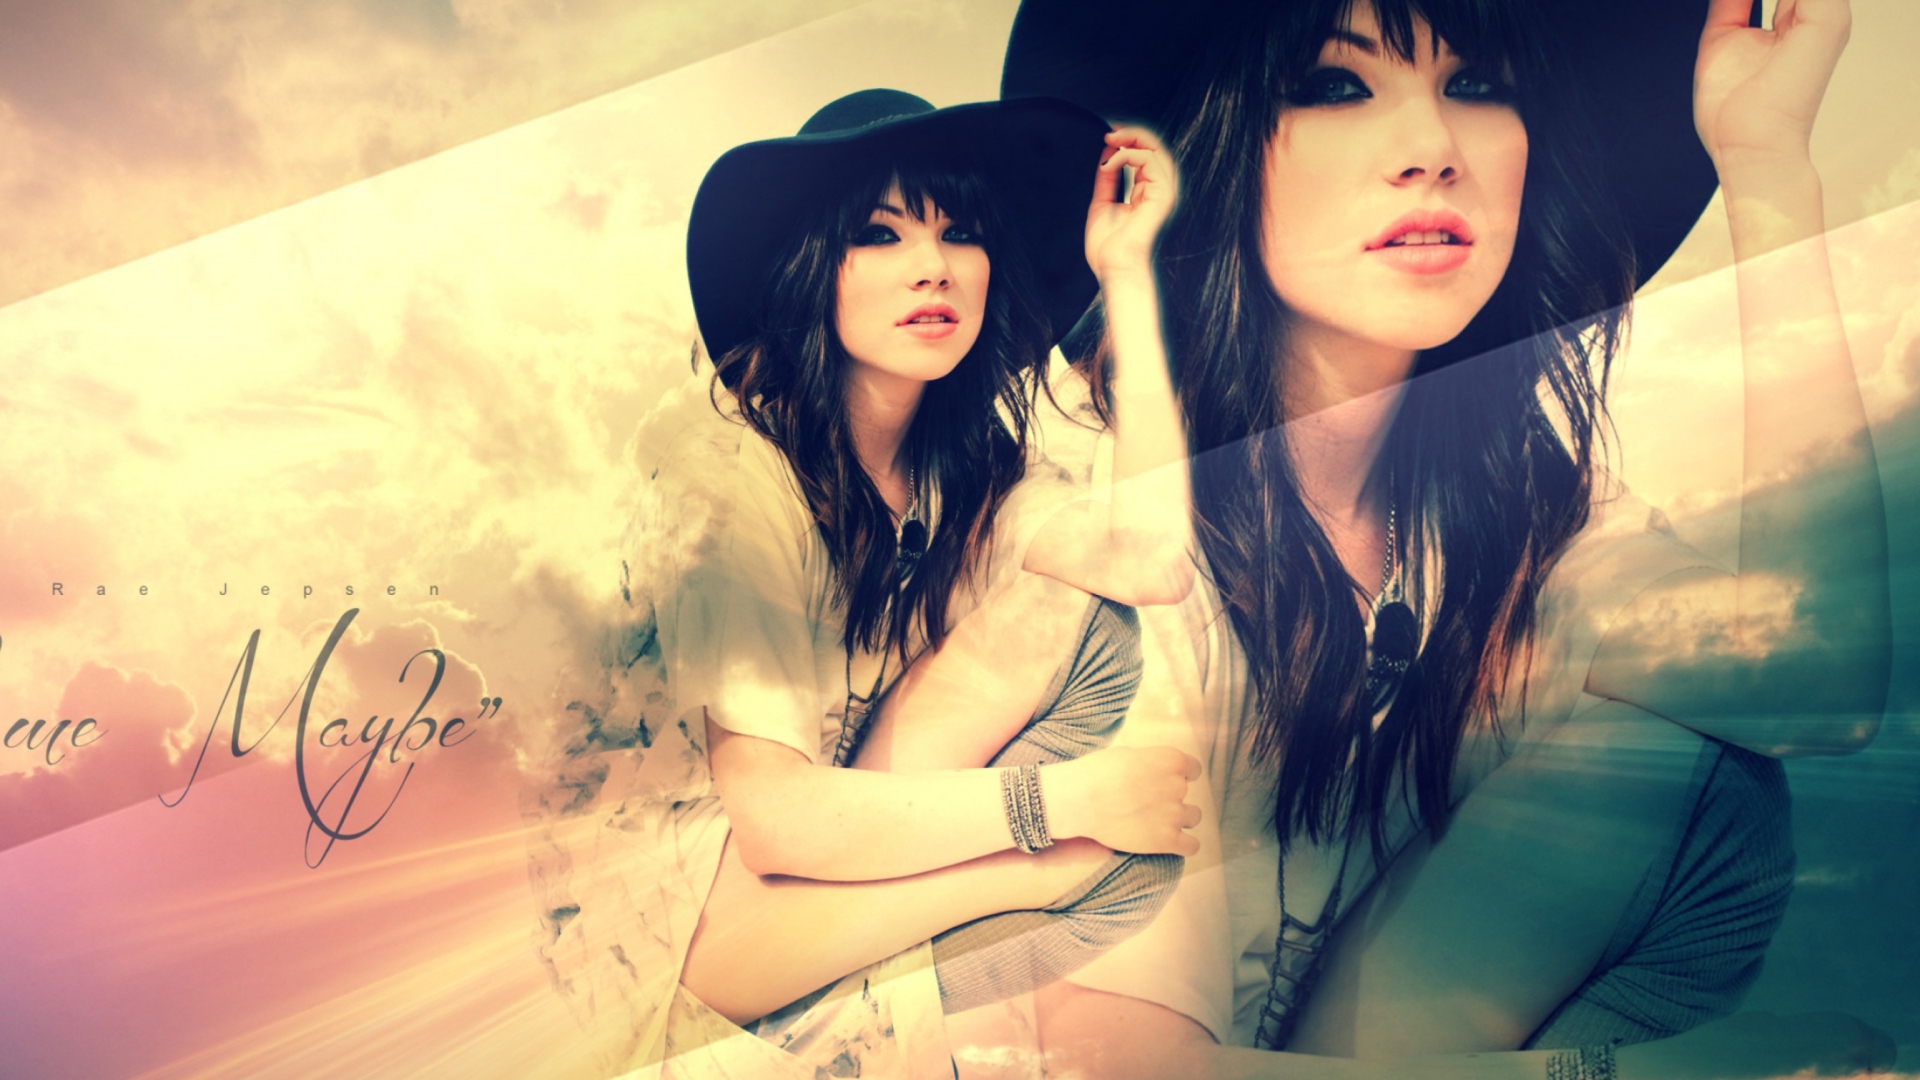 Carly Rae Jepsen - Call Me Maybe Wallpaper for 1920x1080.